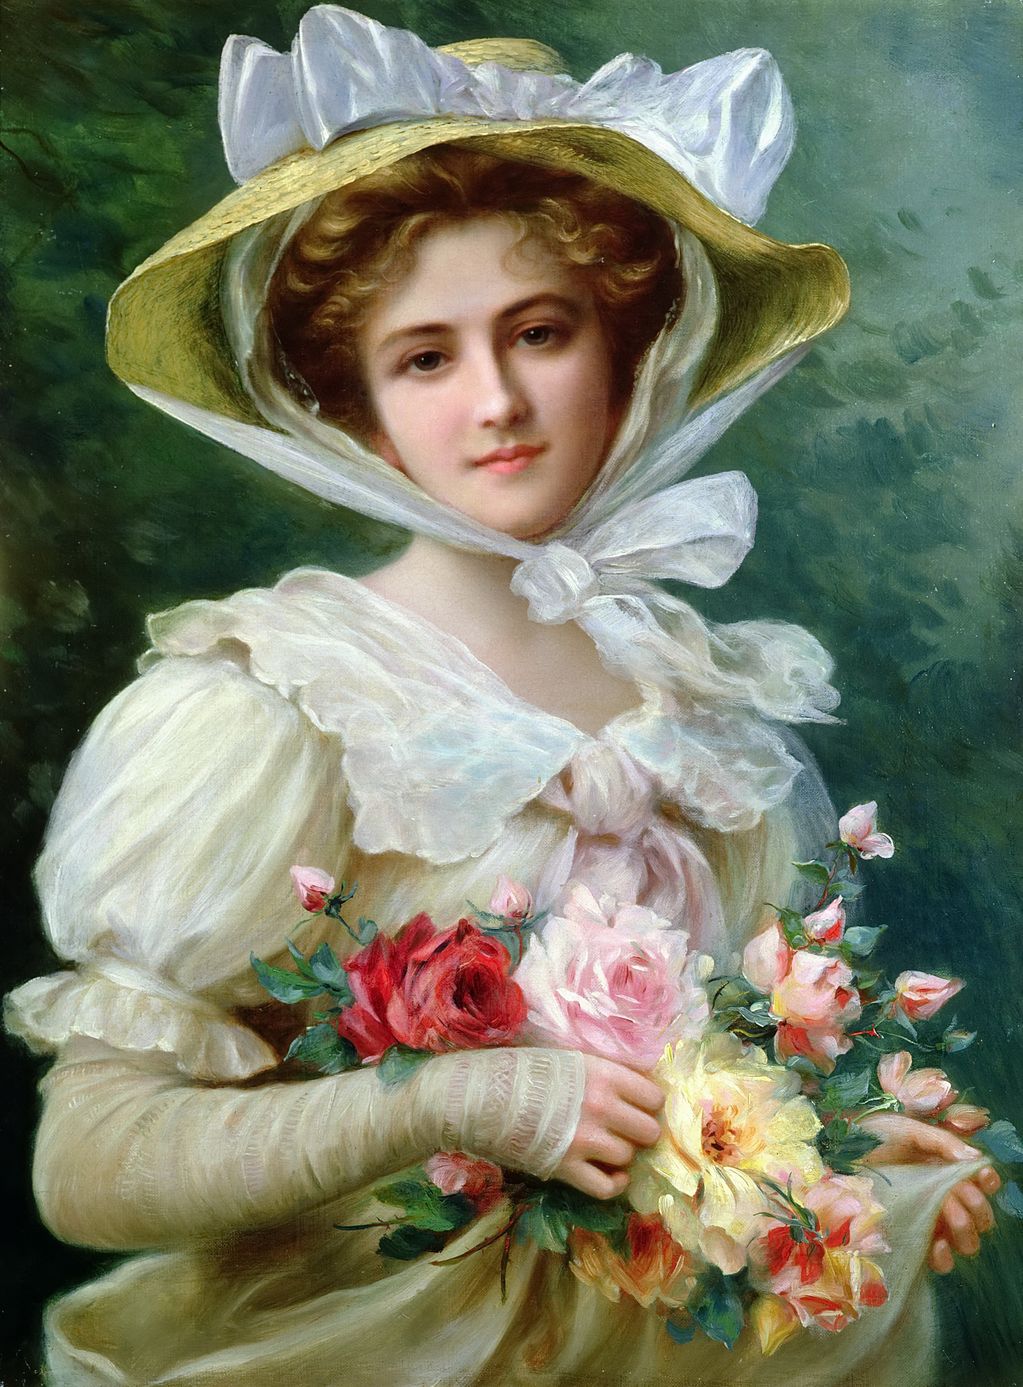 Elegant Lady with a Bouquet of Roses by Emile Vernon